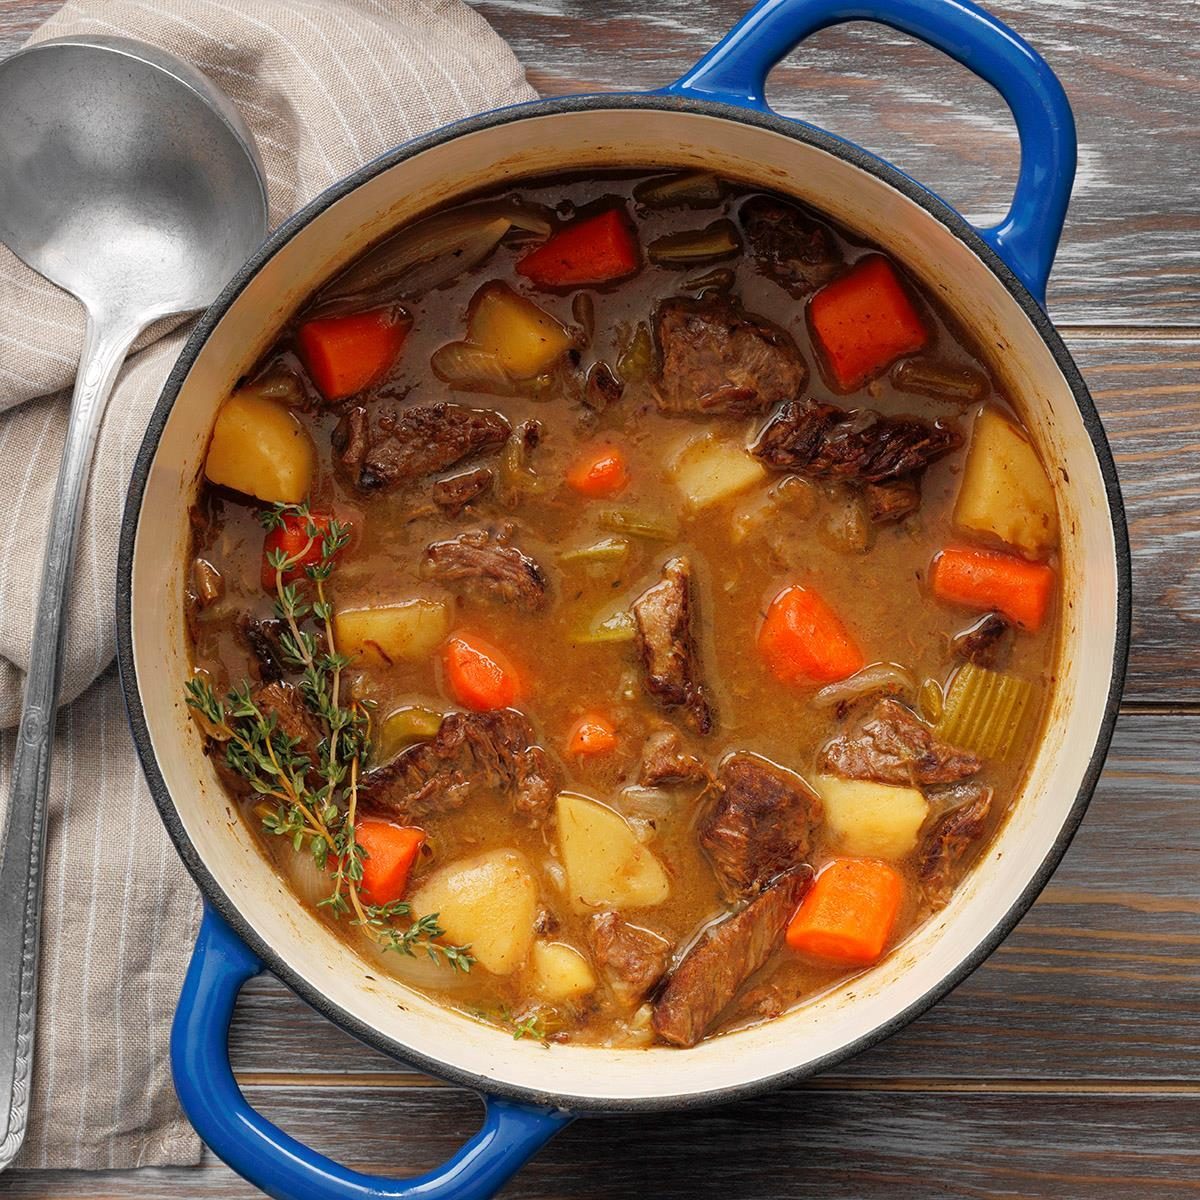 Homemade Apple Cider Beef Stew Recipe: How to Make It